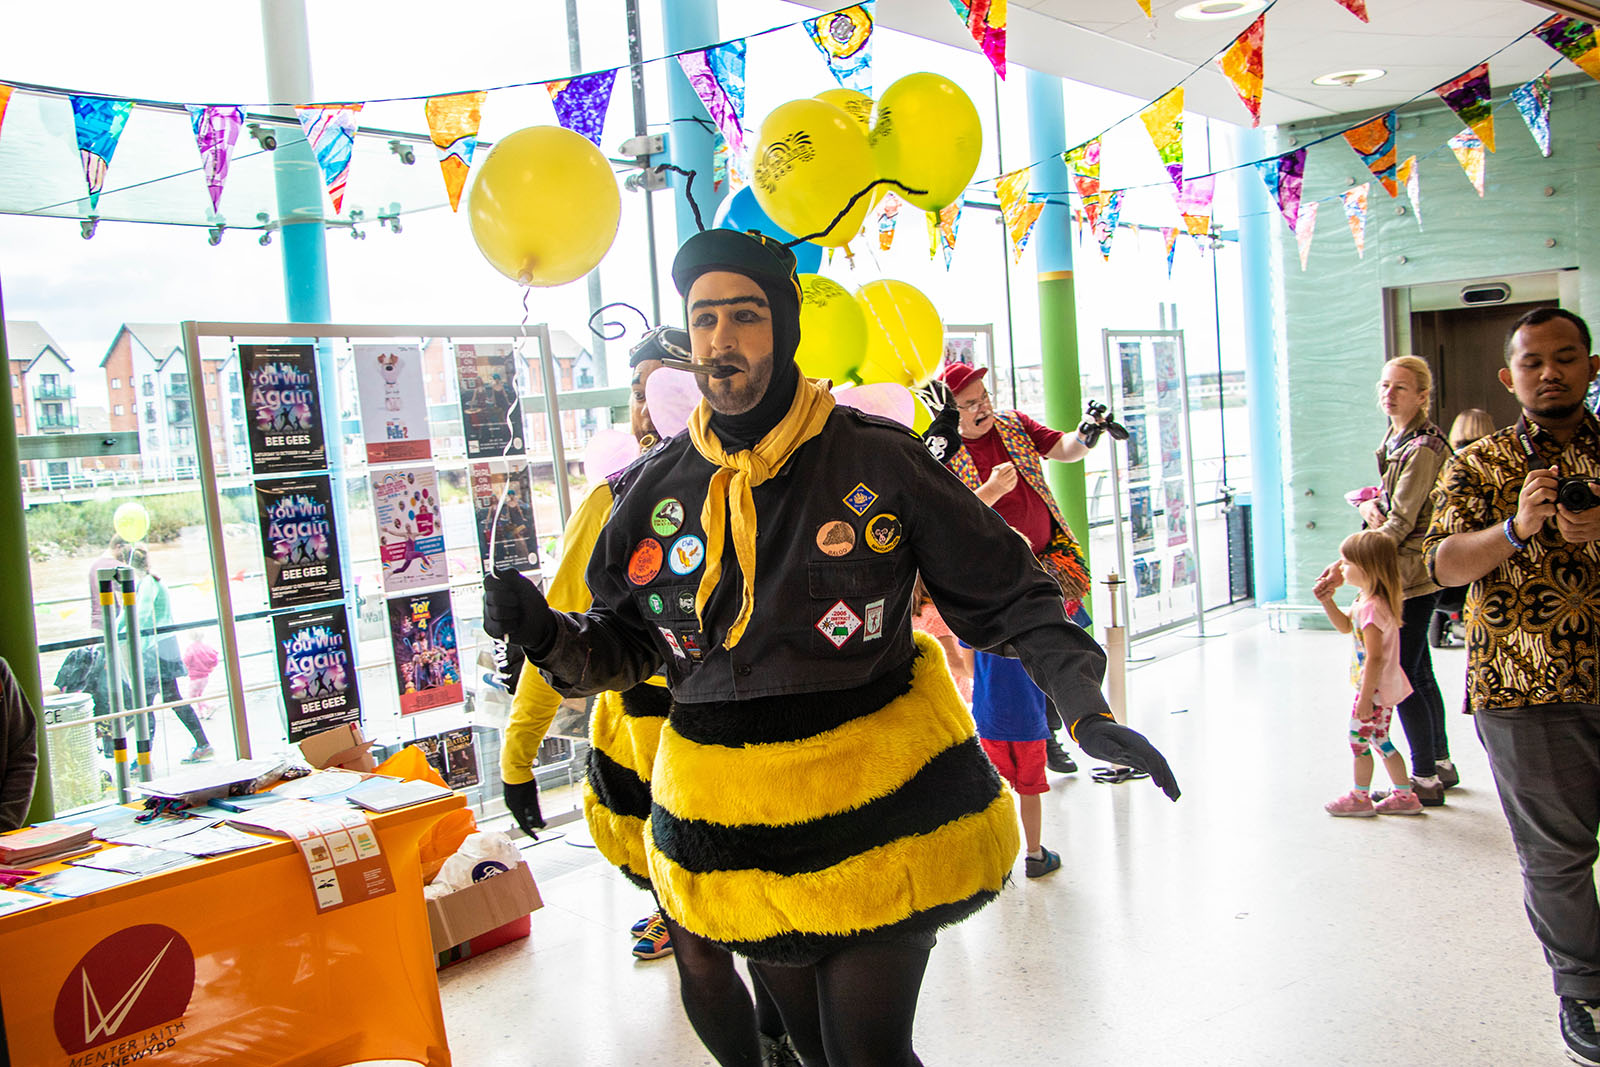 man dressed as a bee holding balloons